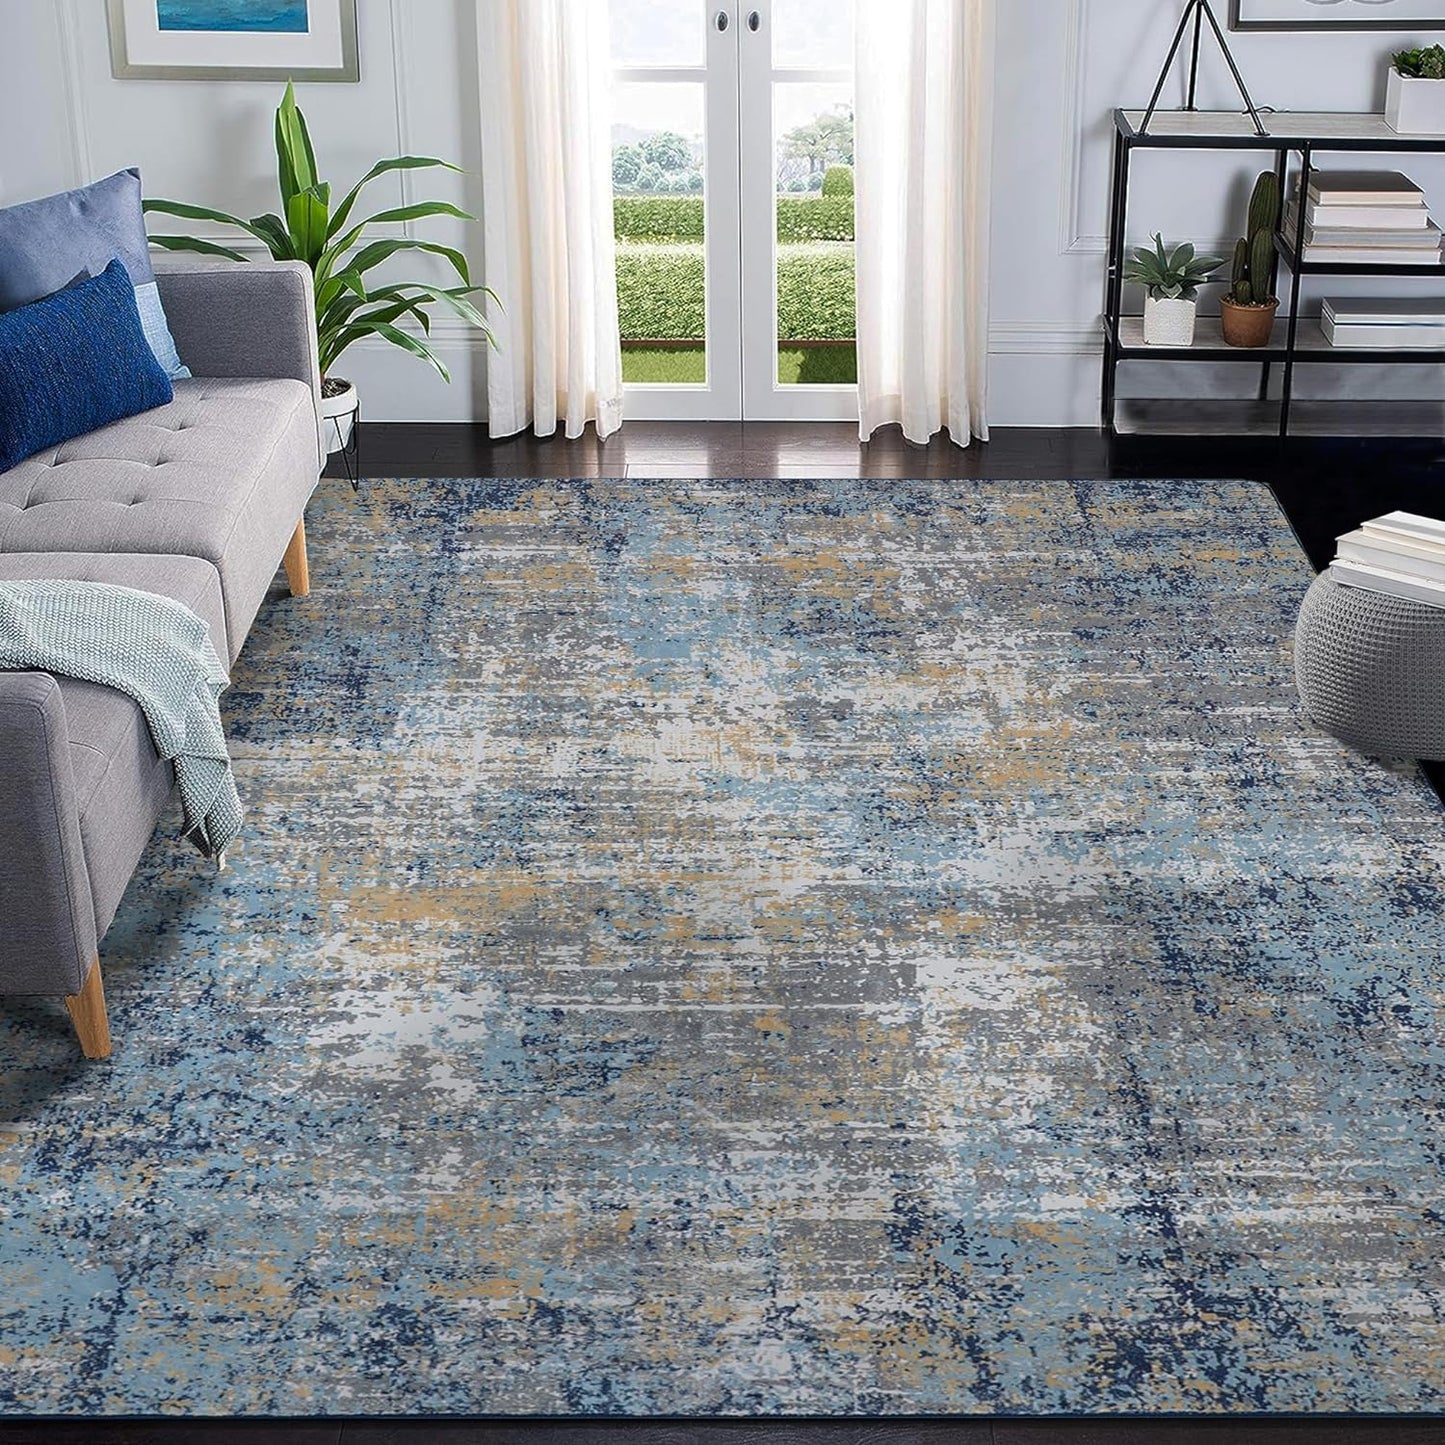 GENIMO Area Rugs for Bedroom Living Room Machine Washable Large Modern Abstract Print Soft Entryway Runner Rug, Non Slip Carpet with Gripper